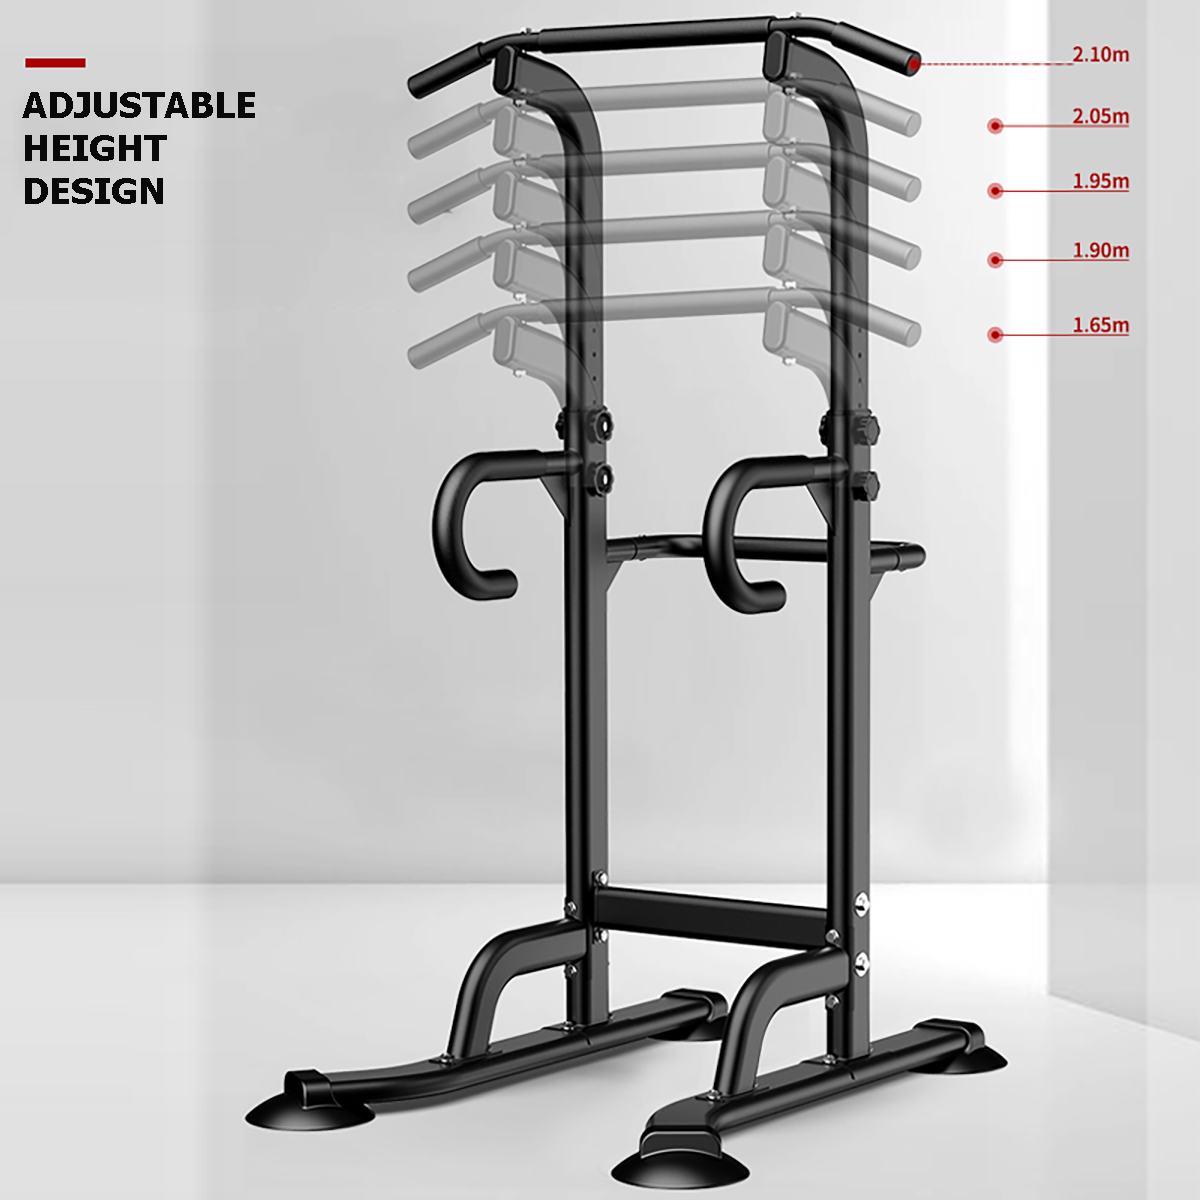 Adjustable Height Pull-Up/Push-Up Bars